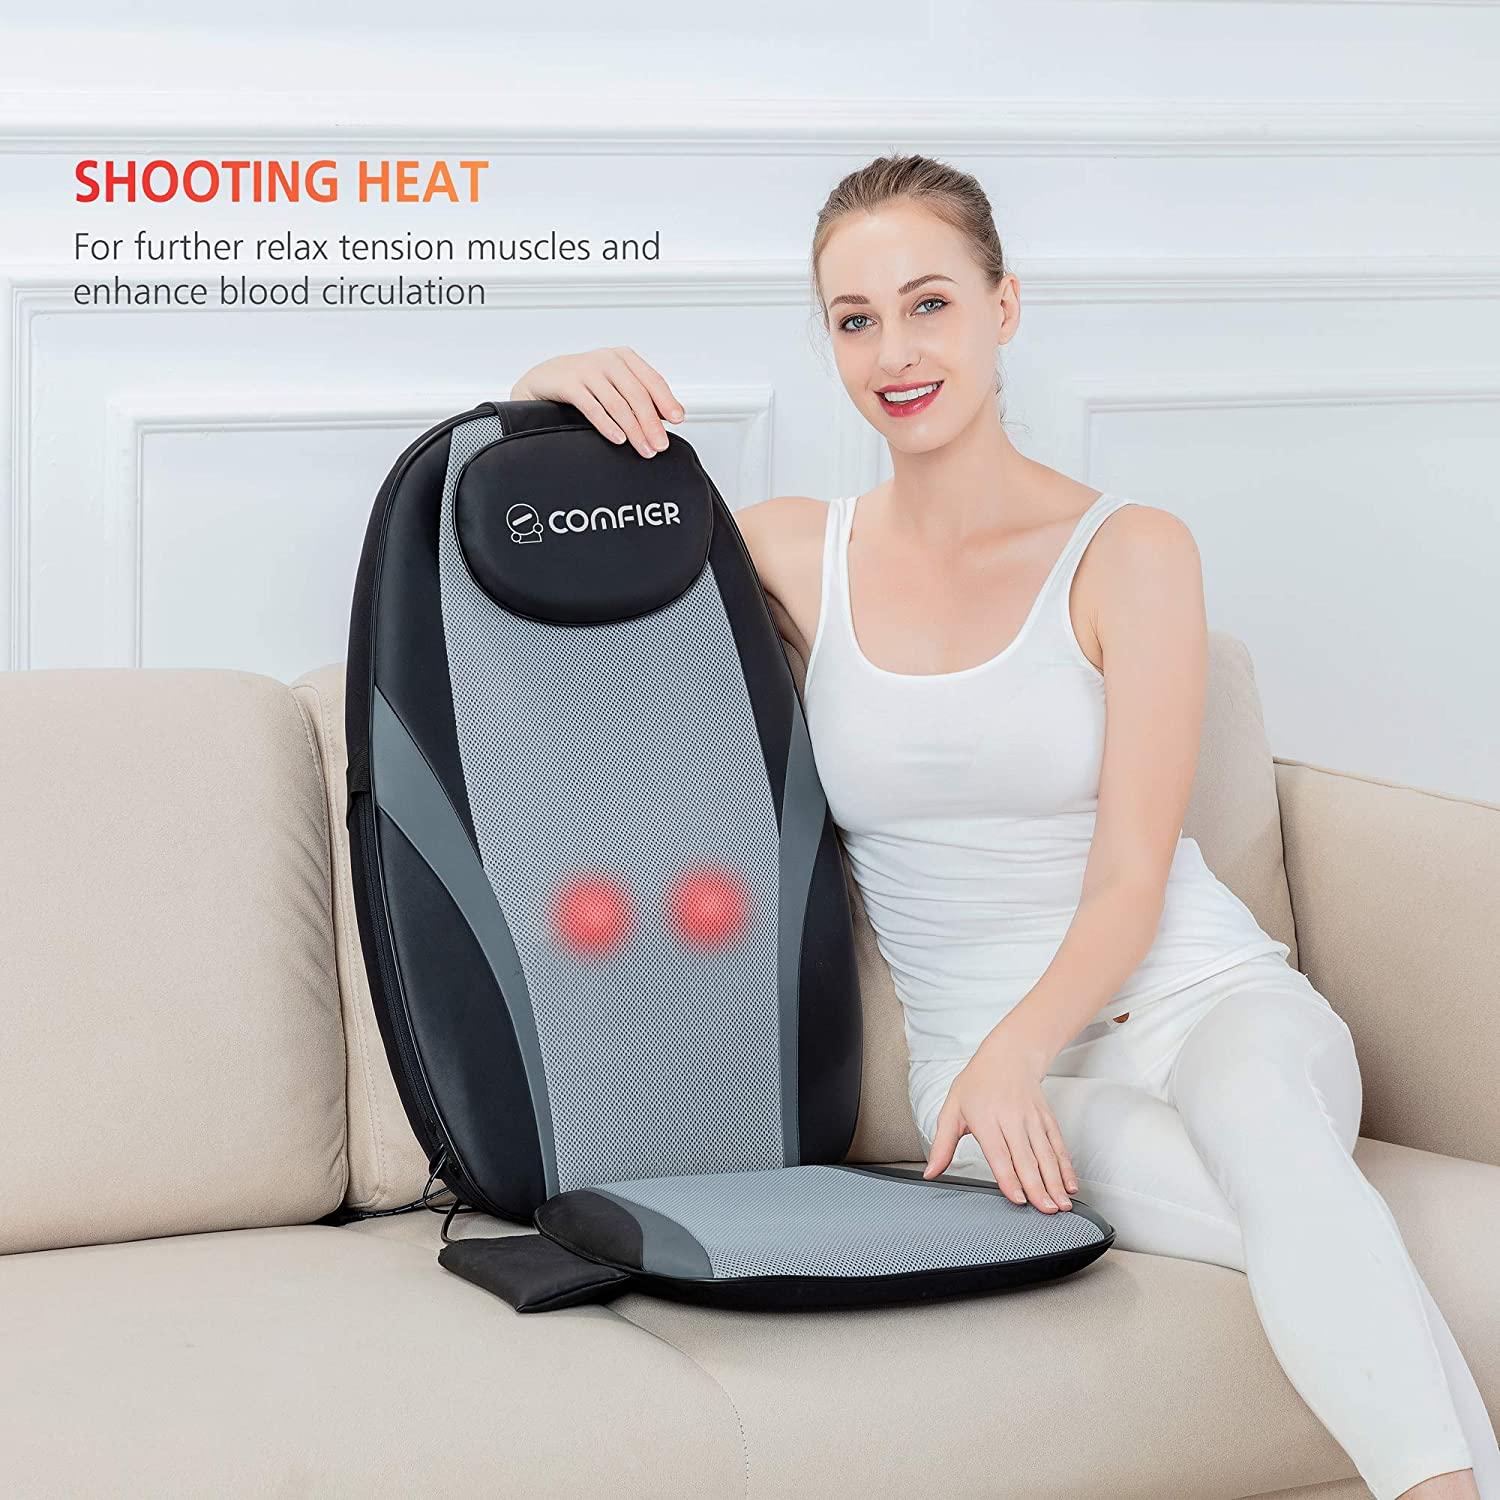 Snailax Shiatsu Deep Kneading Back Massage Cushion-Chair Massager with Heat, Father's Day Gift for Dad, Size: One size, Gray